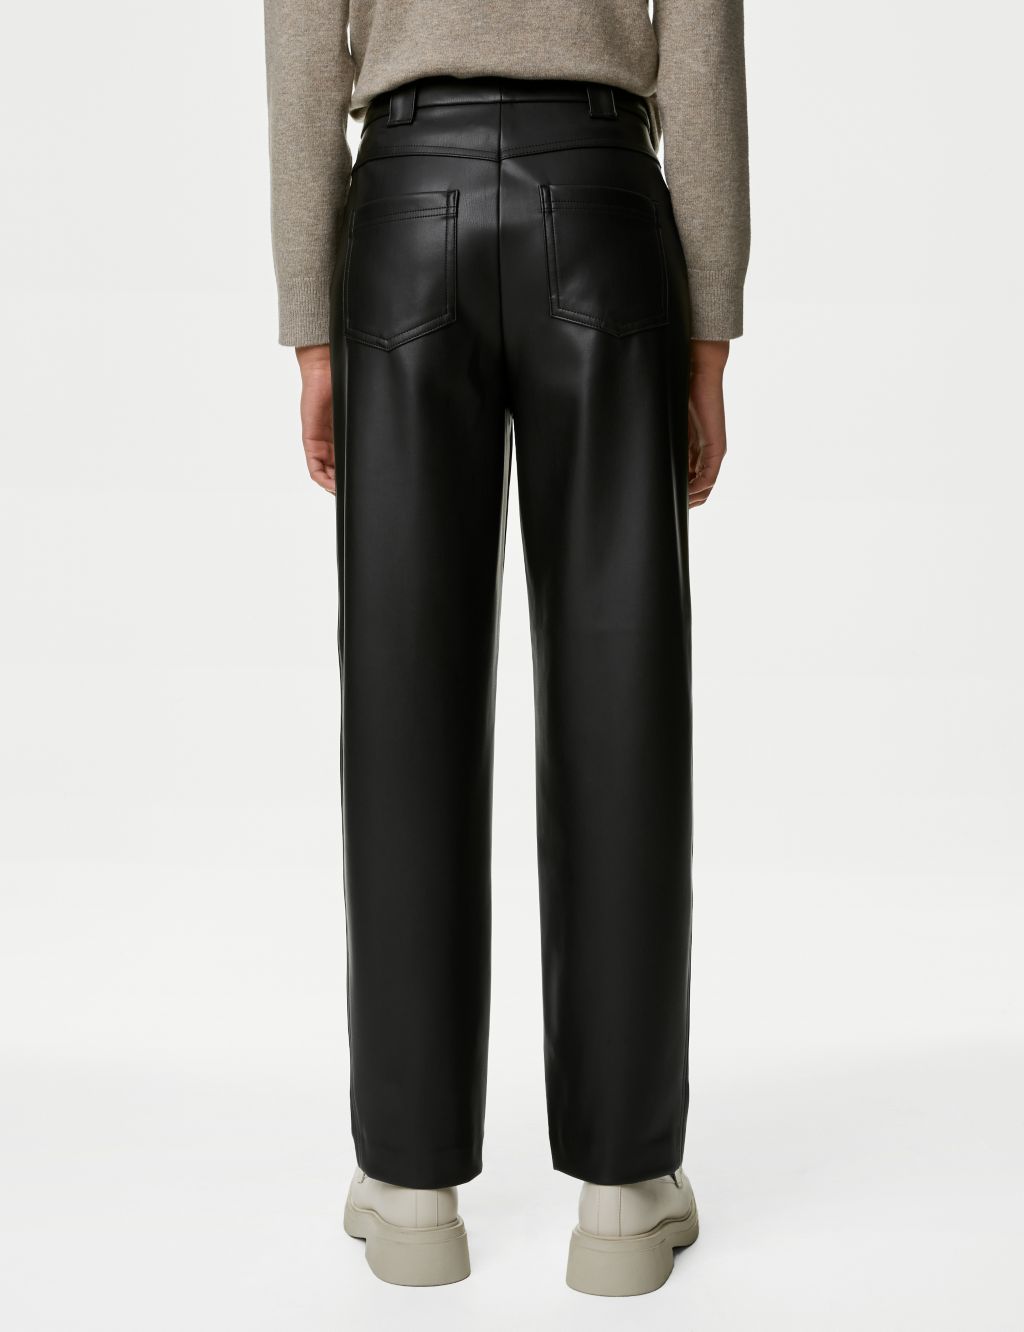 Leather Look Straight Leg Cropped Trousers image 4